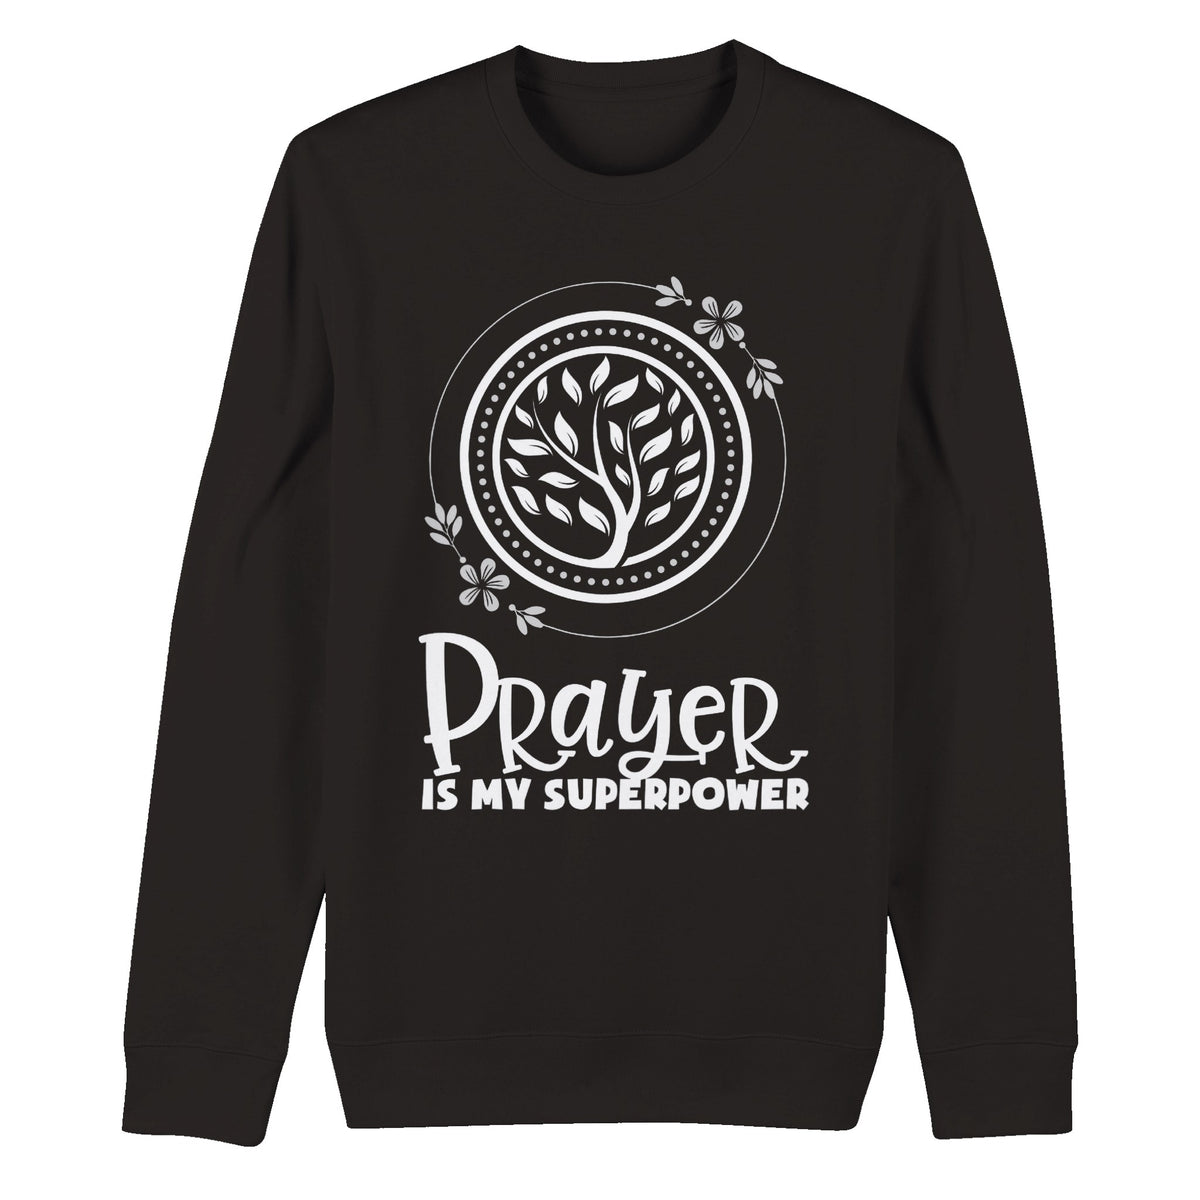 Prayer is my superpower- Tree of life